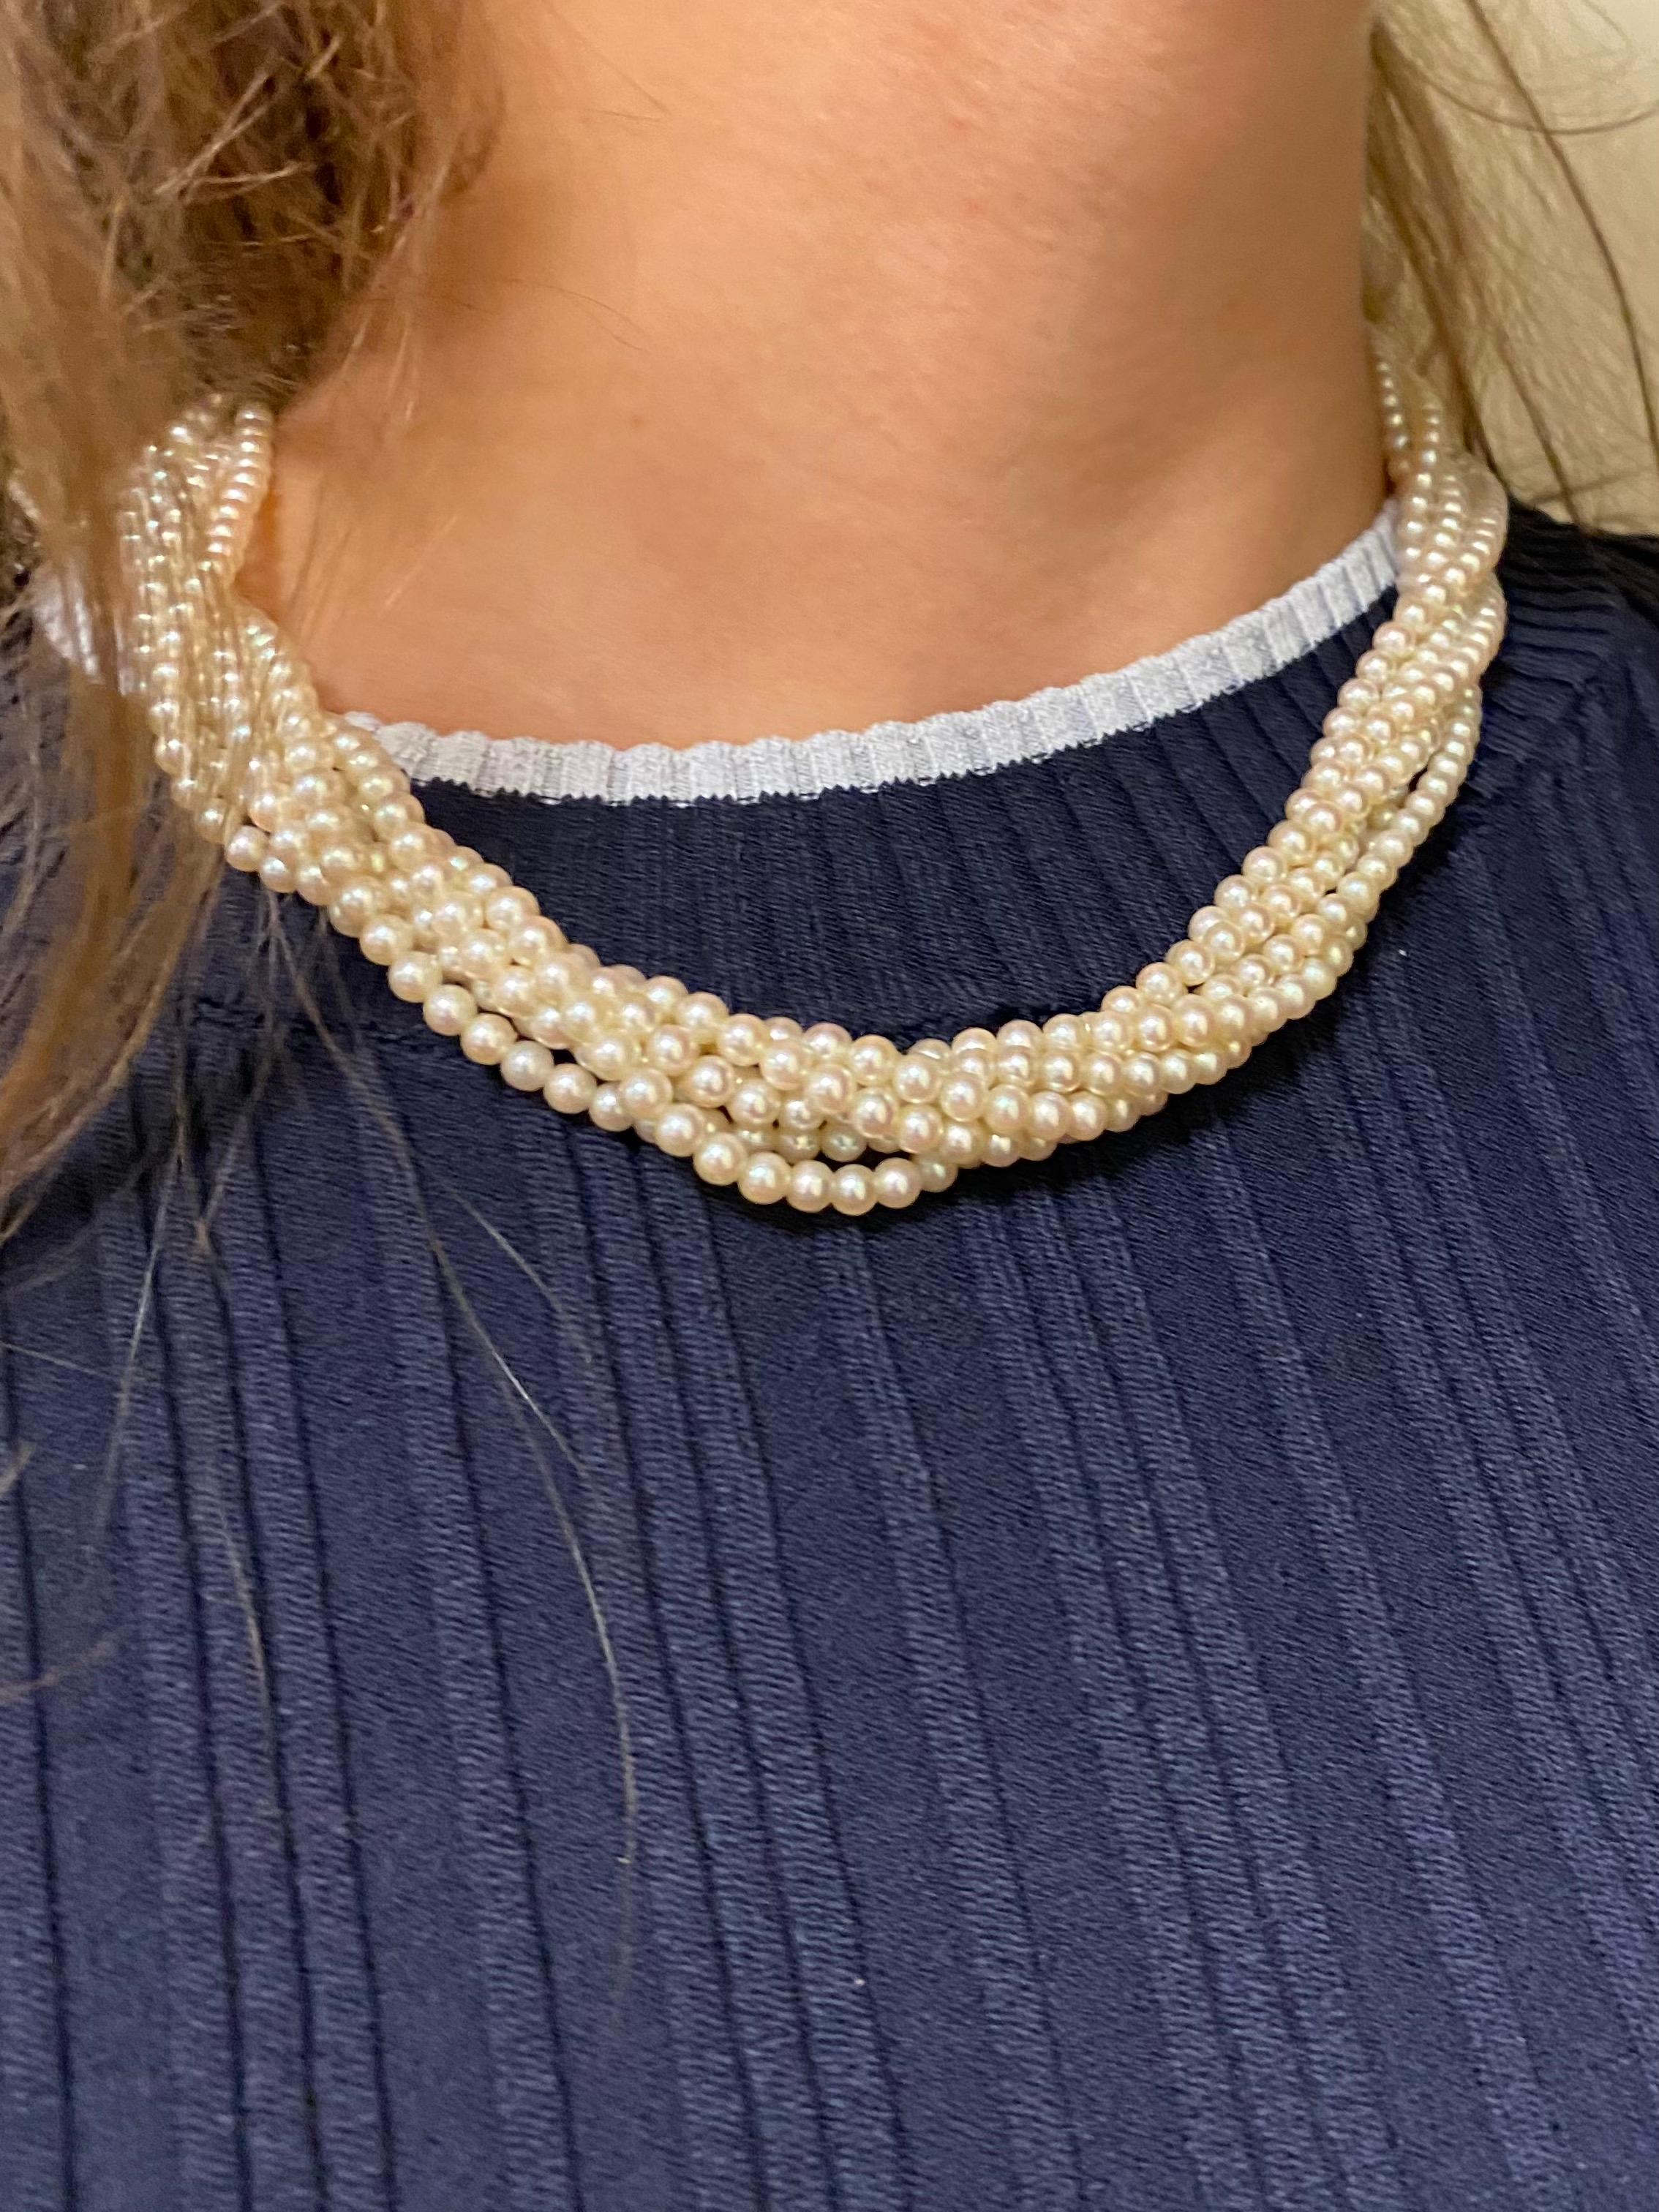 Women's or Men's 6 Row Cultured Pearls Necklace Yellow and White Gold 18 Karat For Sale